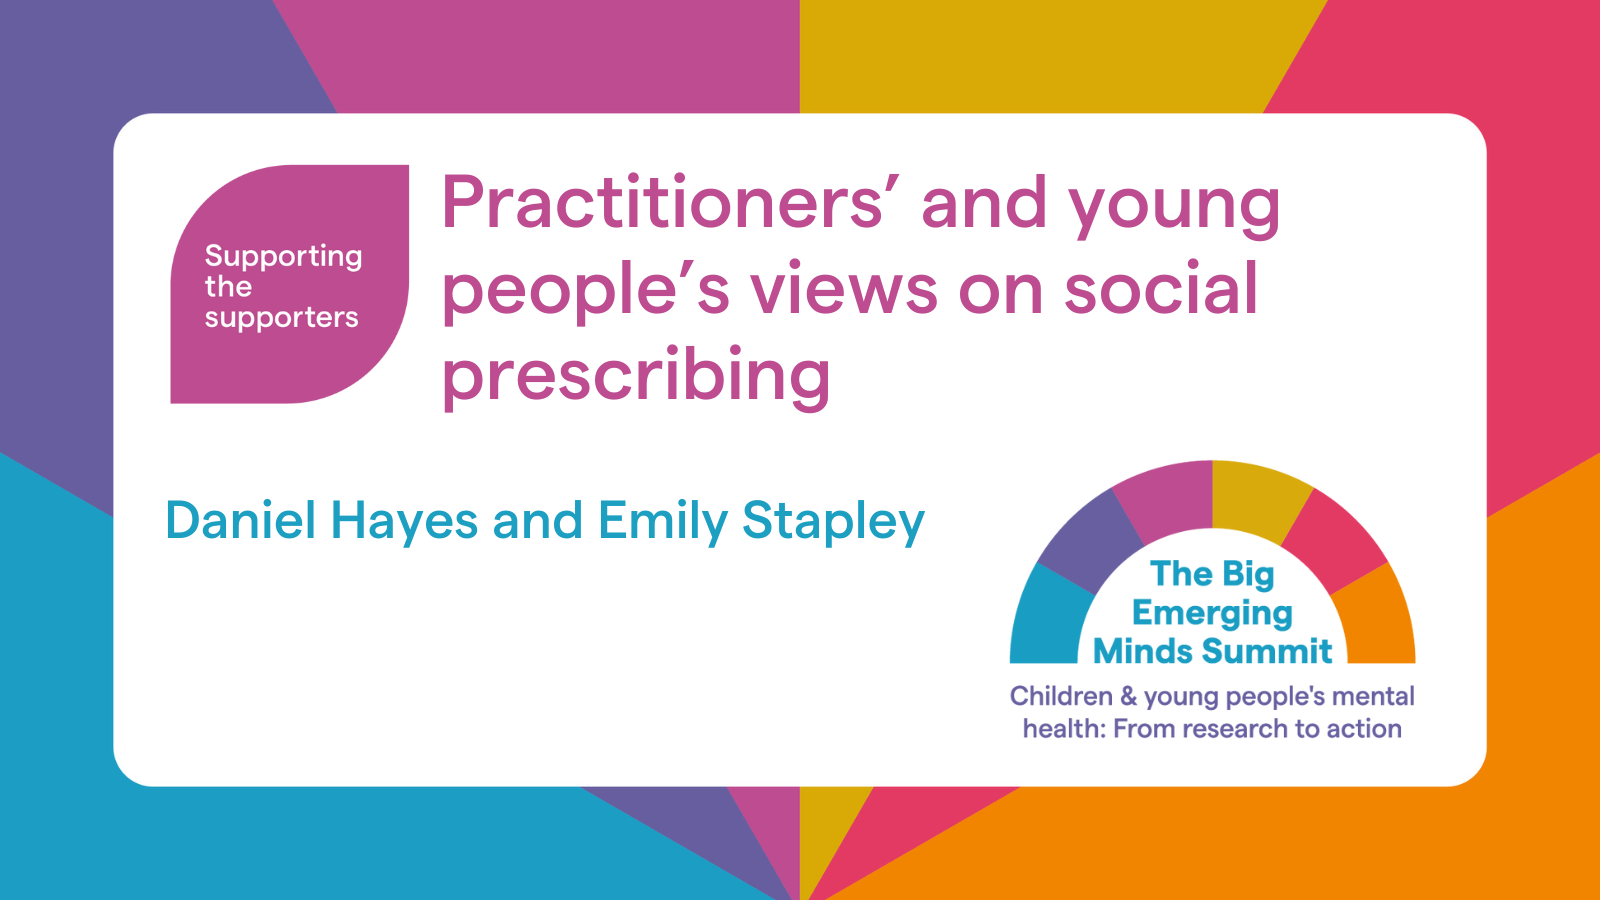 Practitioners' and young people's views on social prescribing